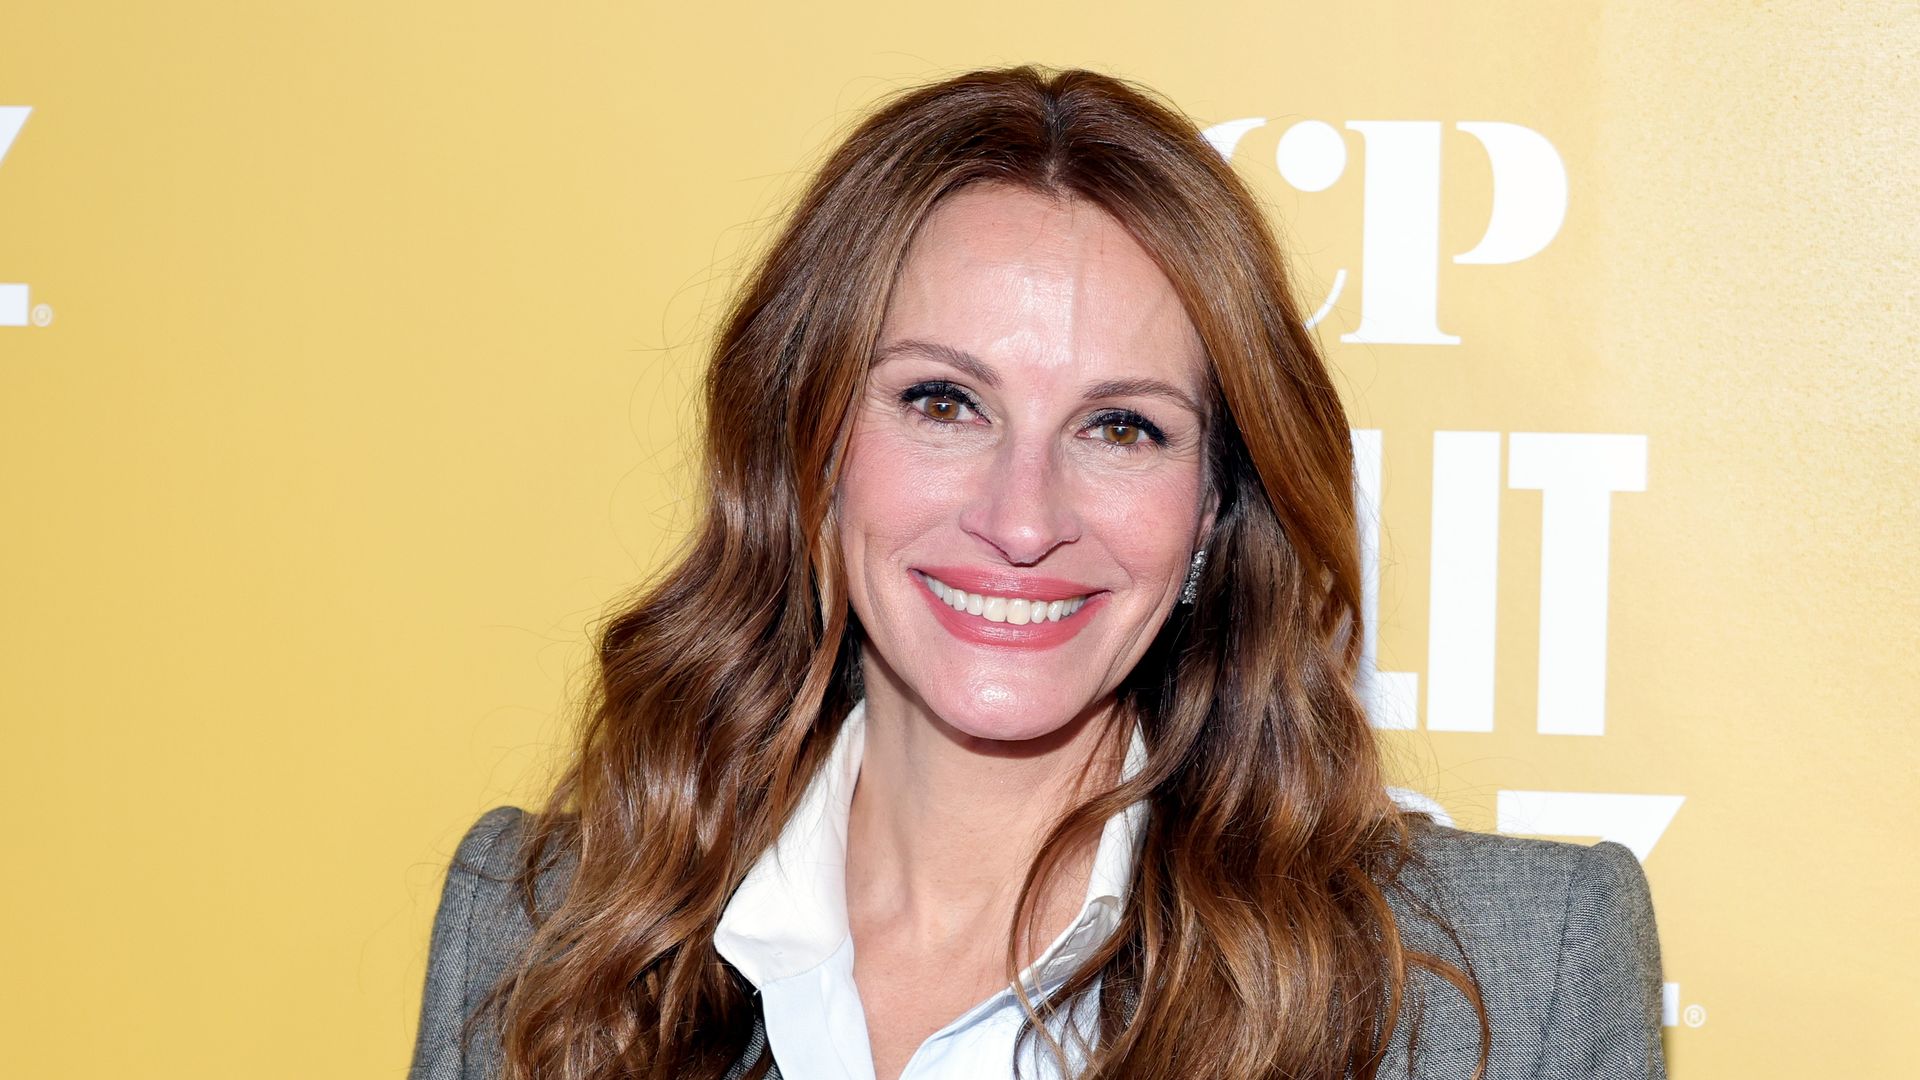 Julia Roberts attends the GASLIT World Premiere on April 18, 2022 in New York City